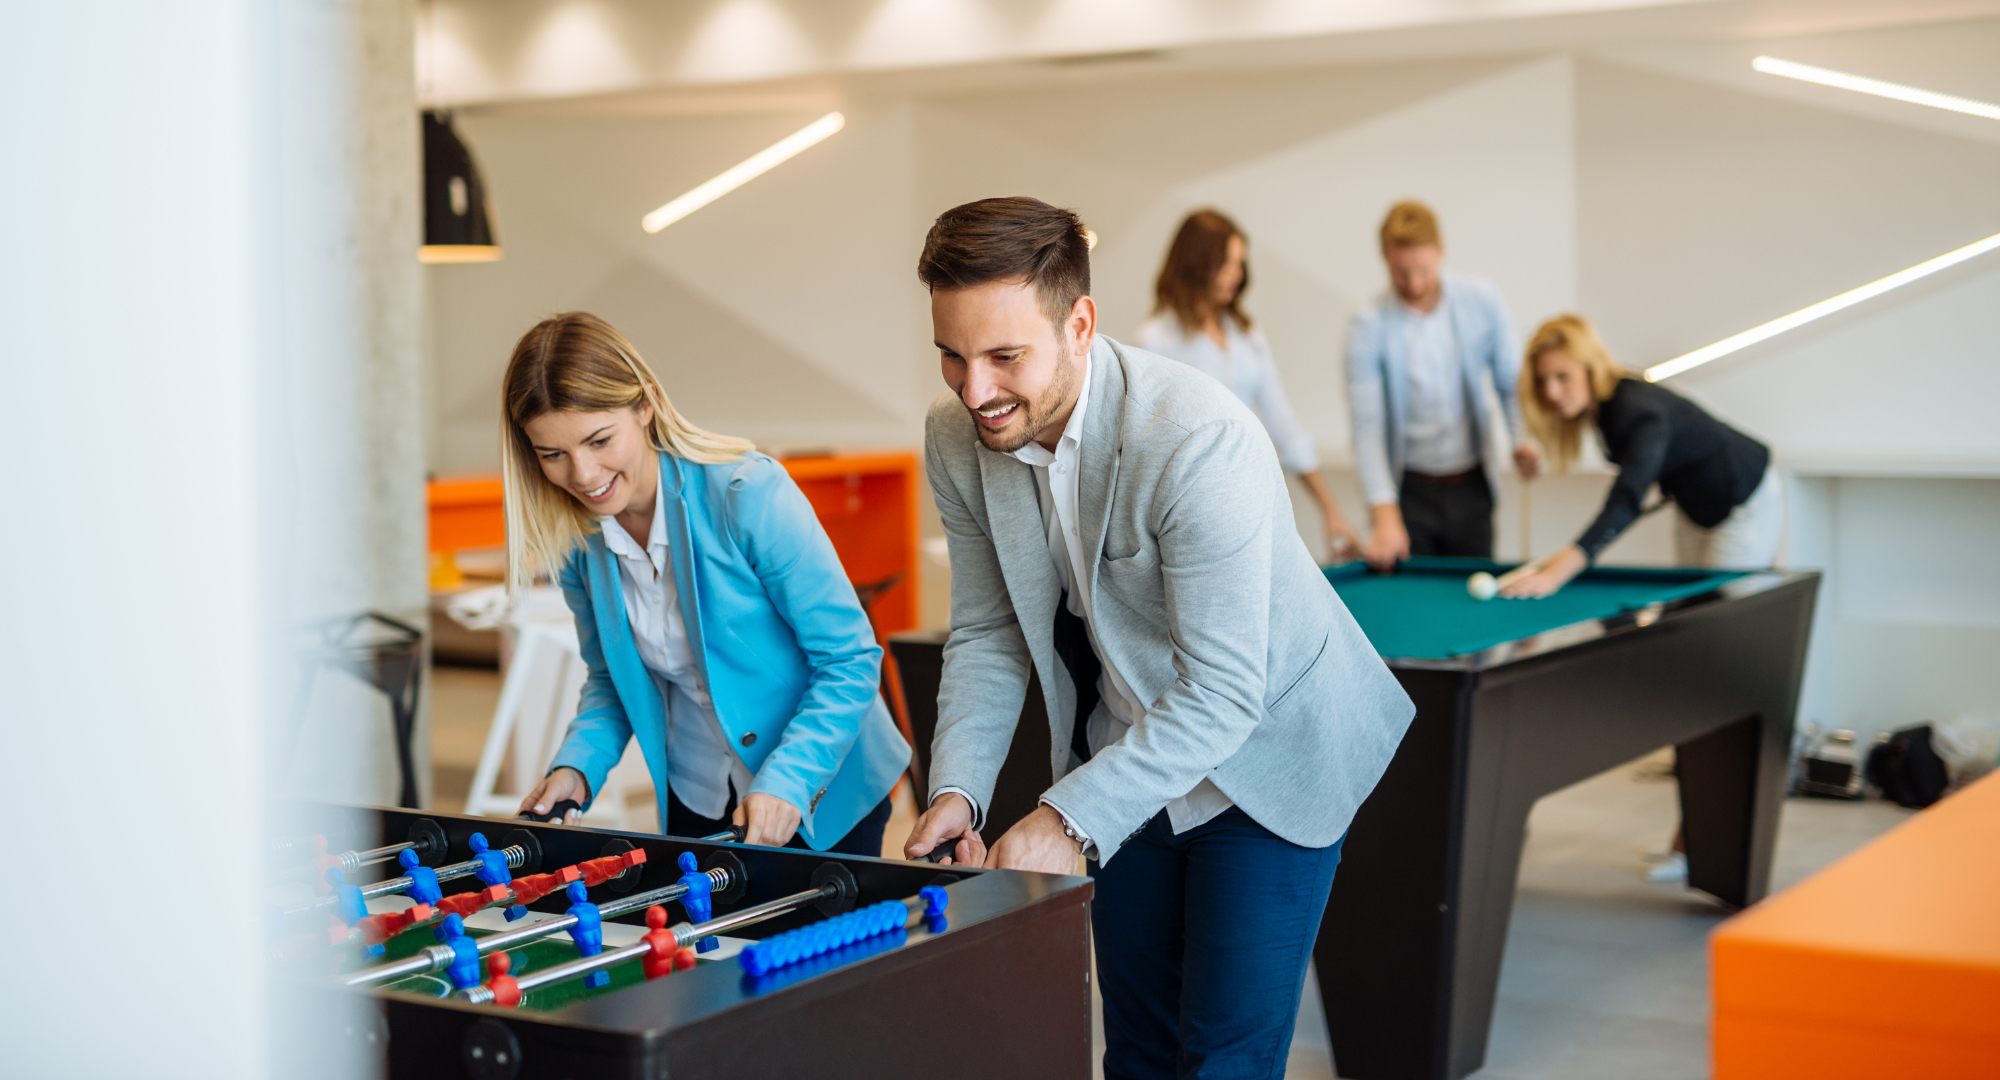 A man and a woman smiling and playing foosball